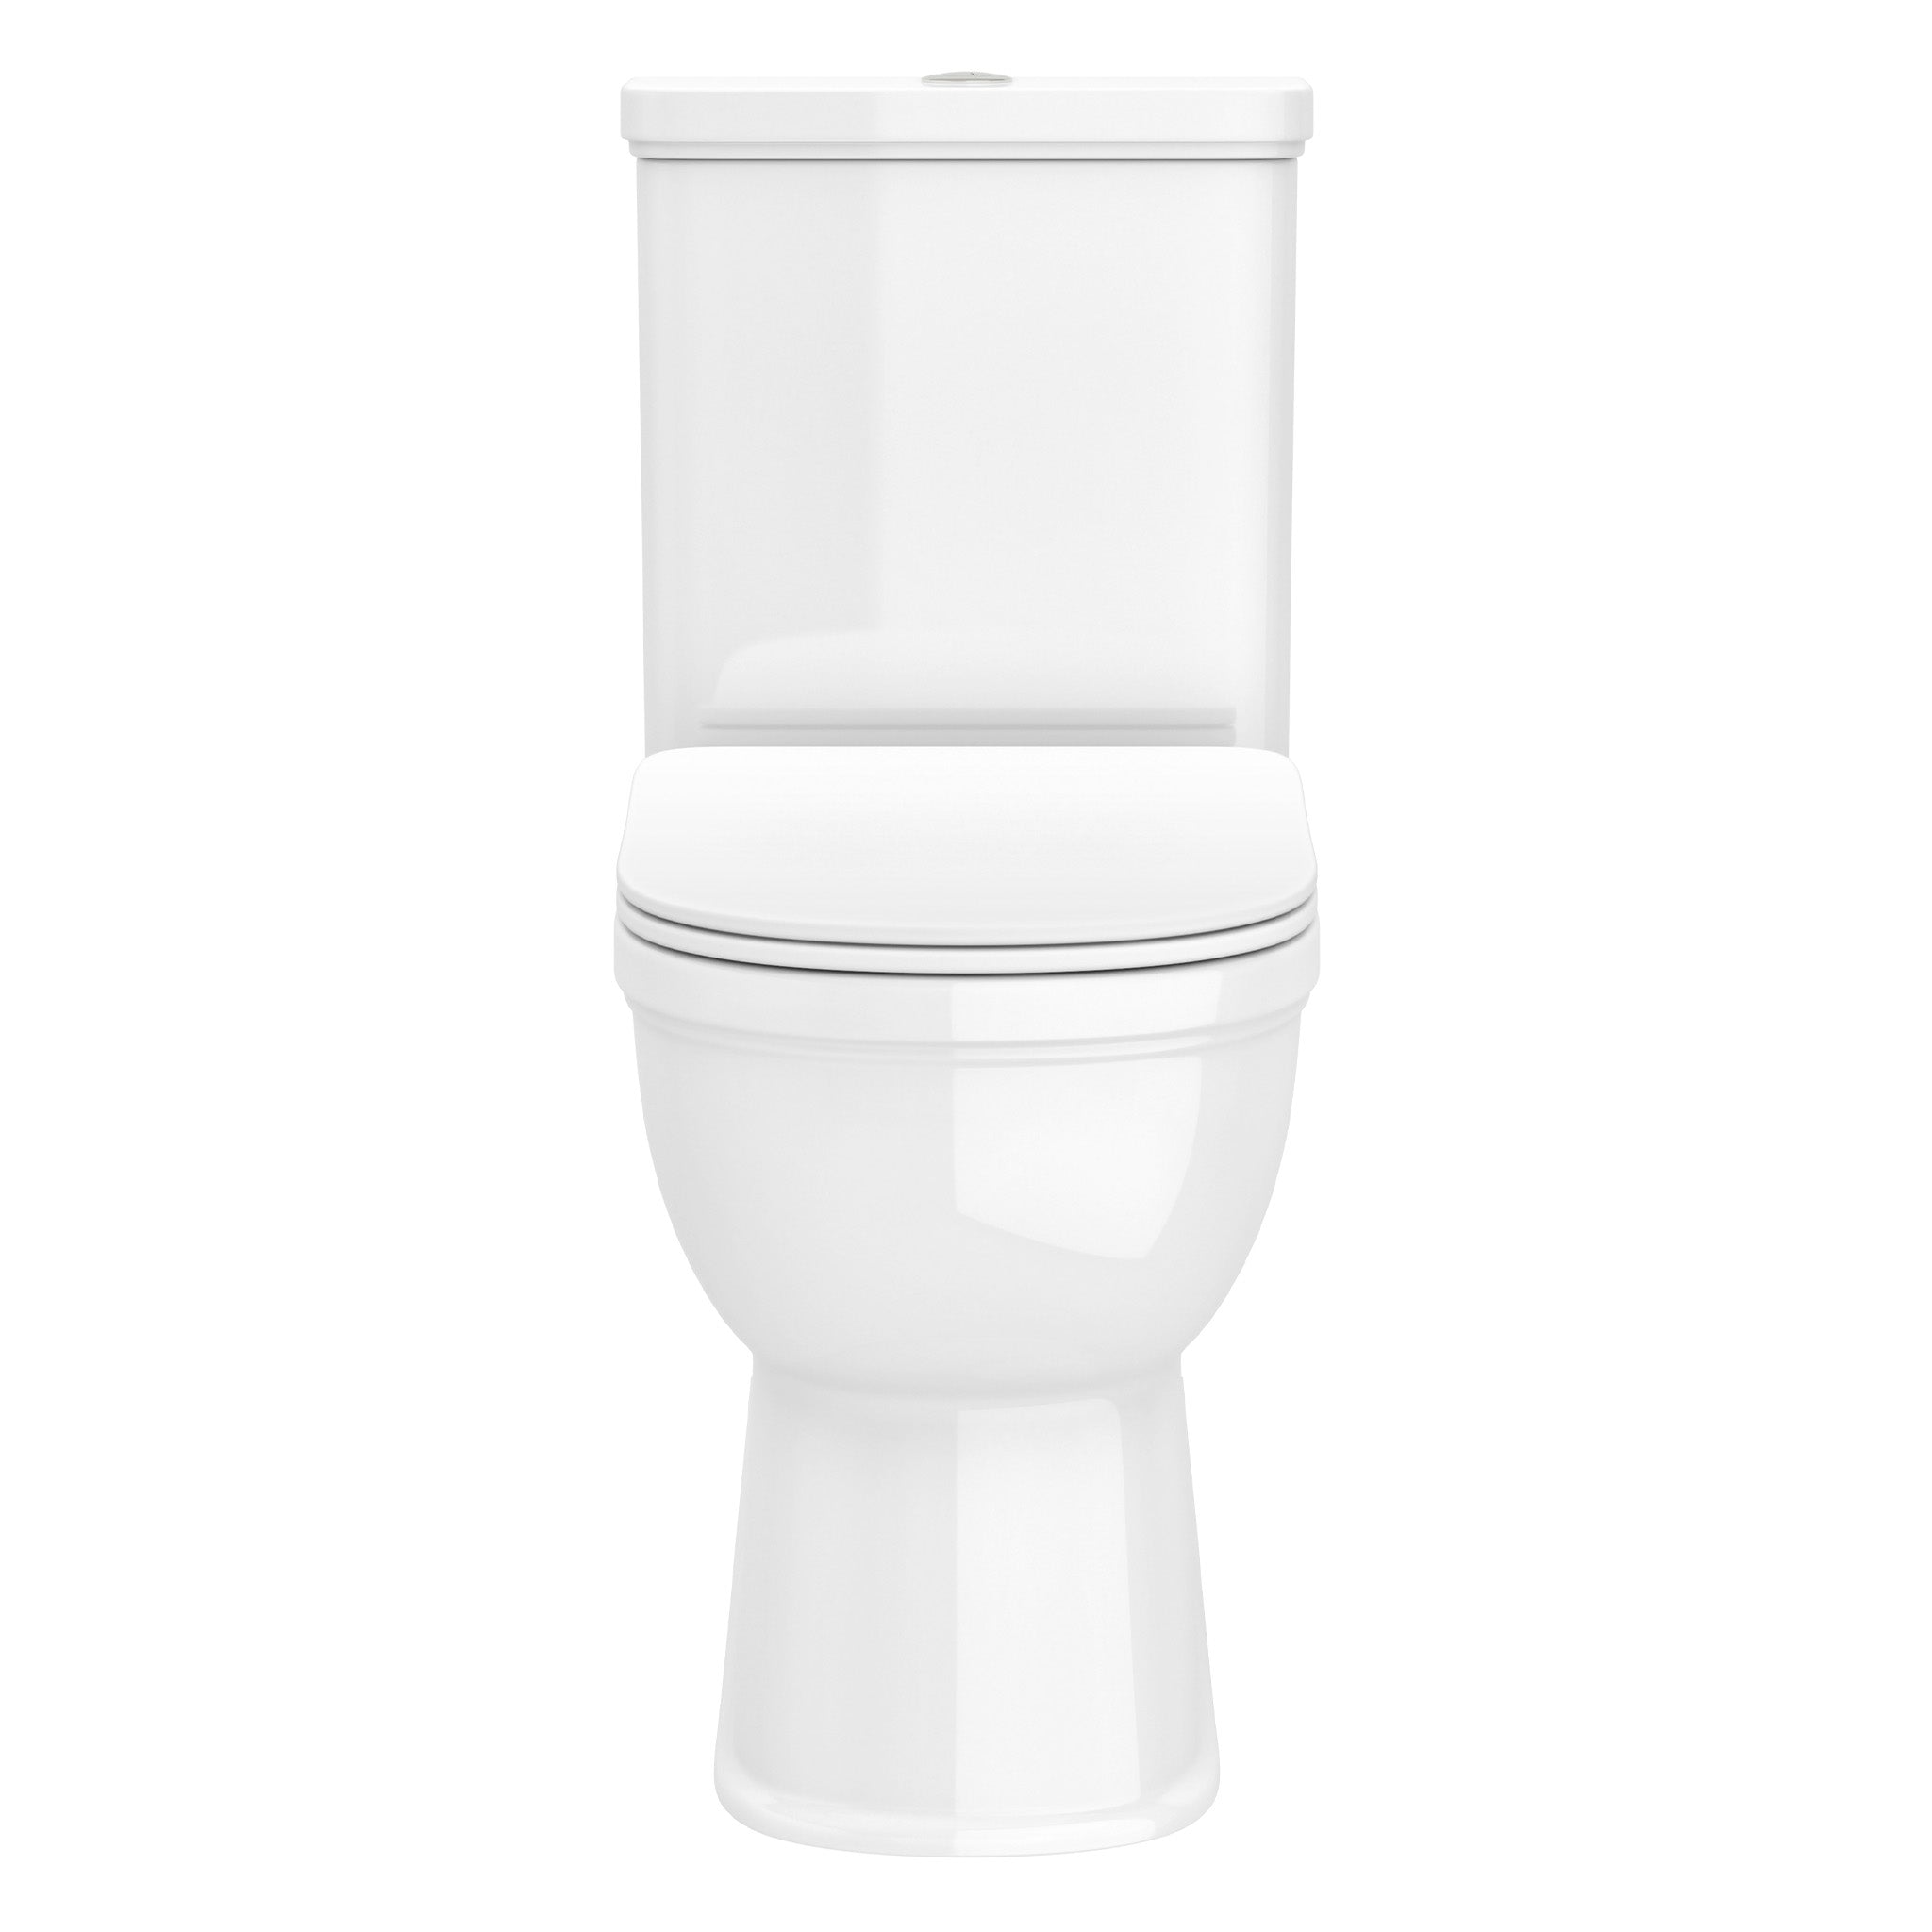 MyLife Farnham Closed Coupled Fully Enclosed Comfort Height Rimless Pan, Cistern & Seat